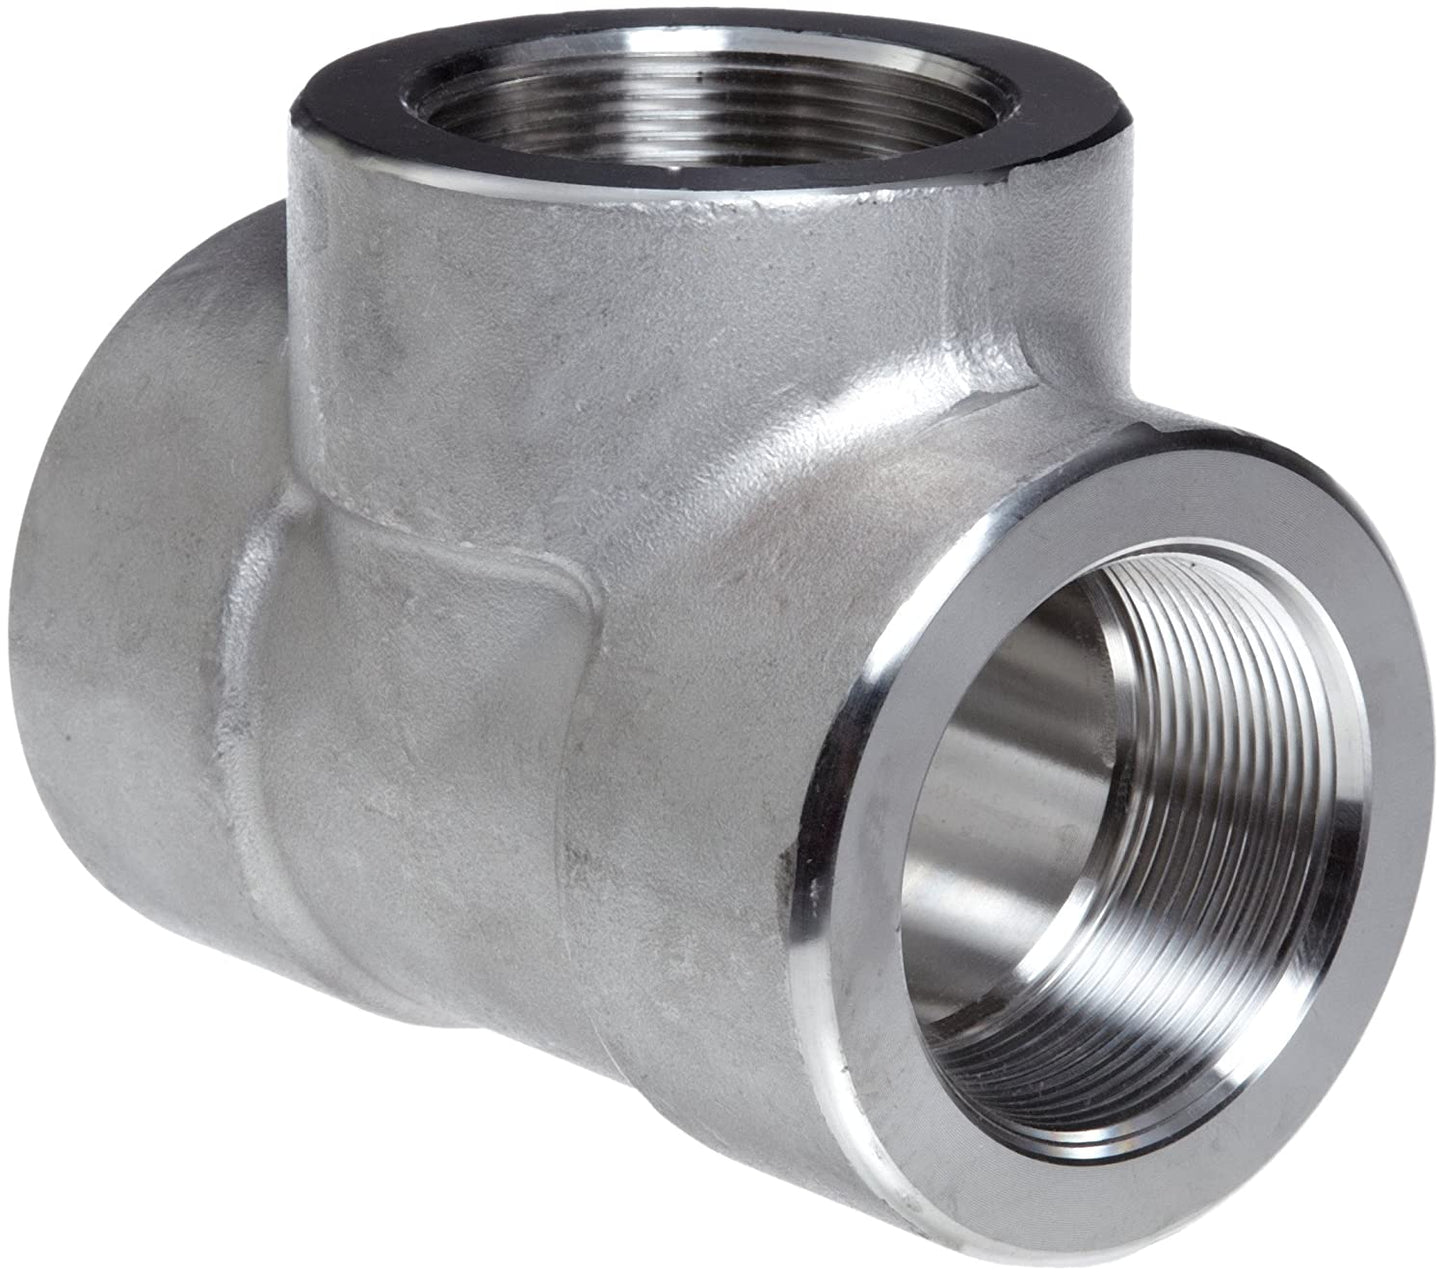 3406D-04 - 1/4" Threaded Tee, 304/304L Stainless Steel